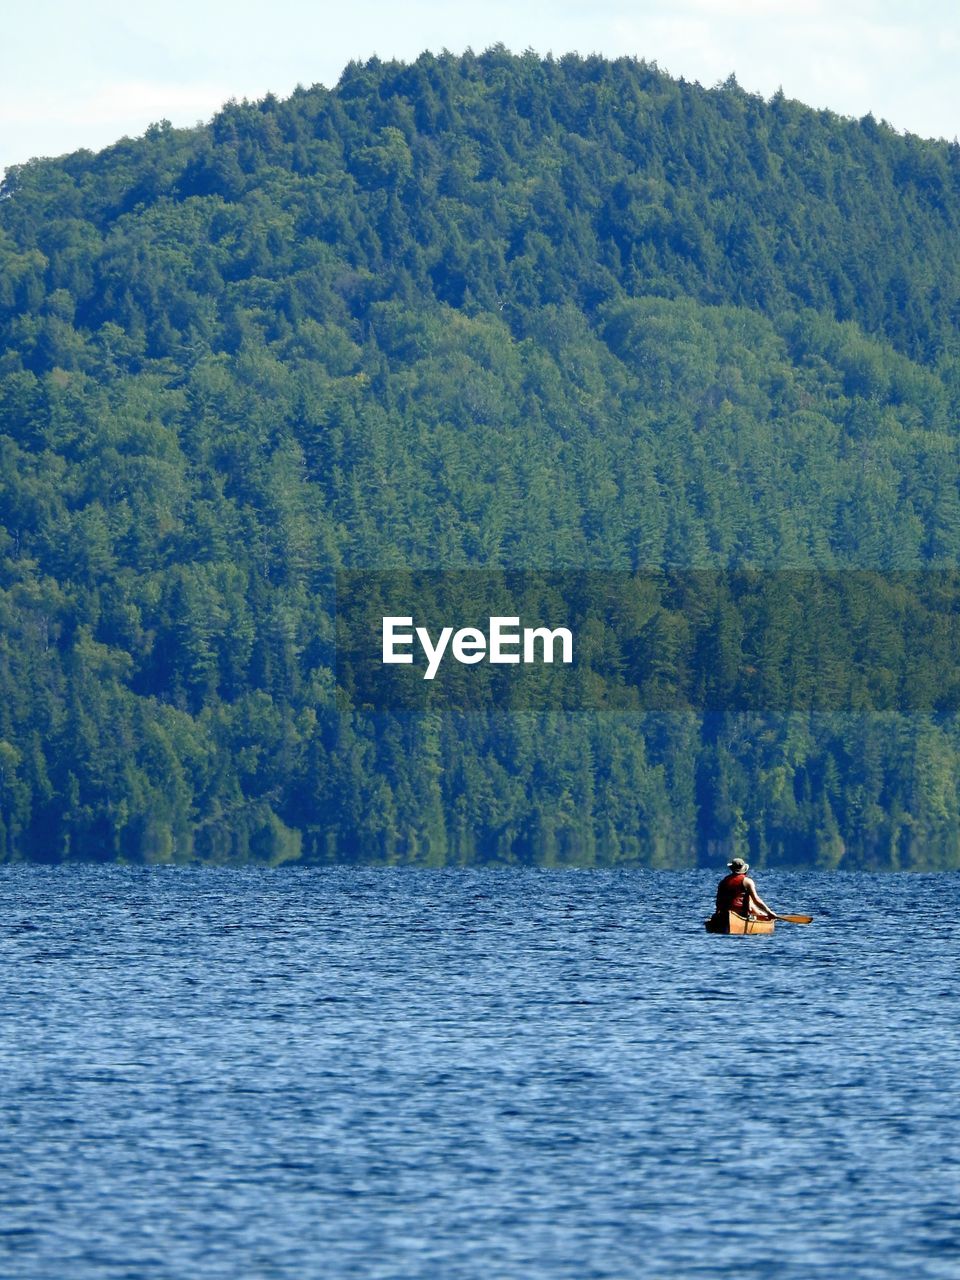 Man on boat in lake against trees